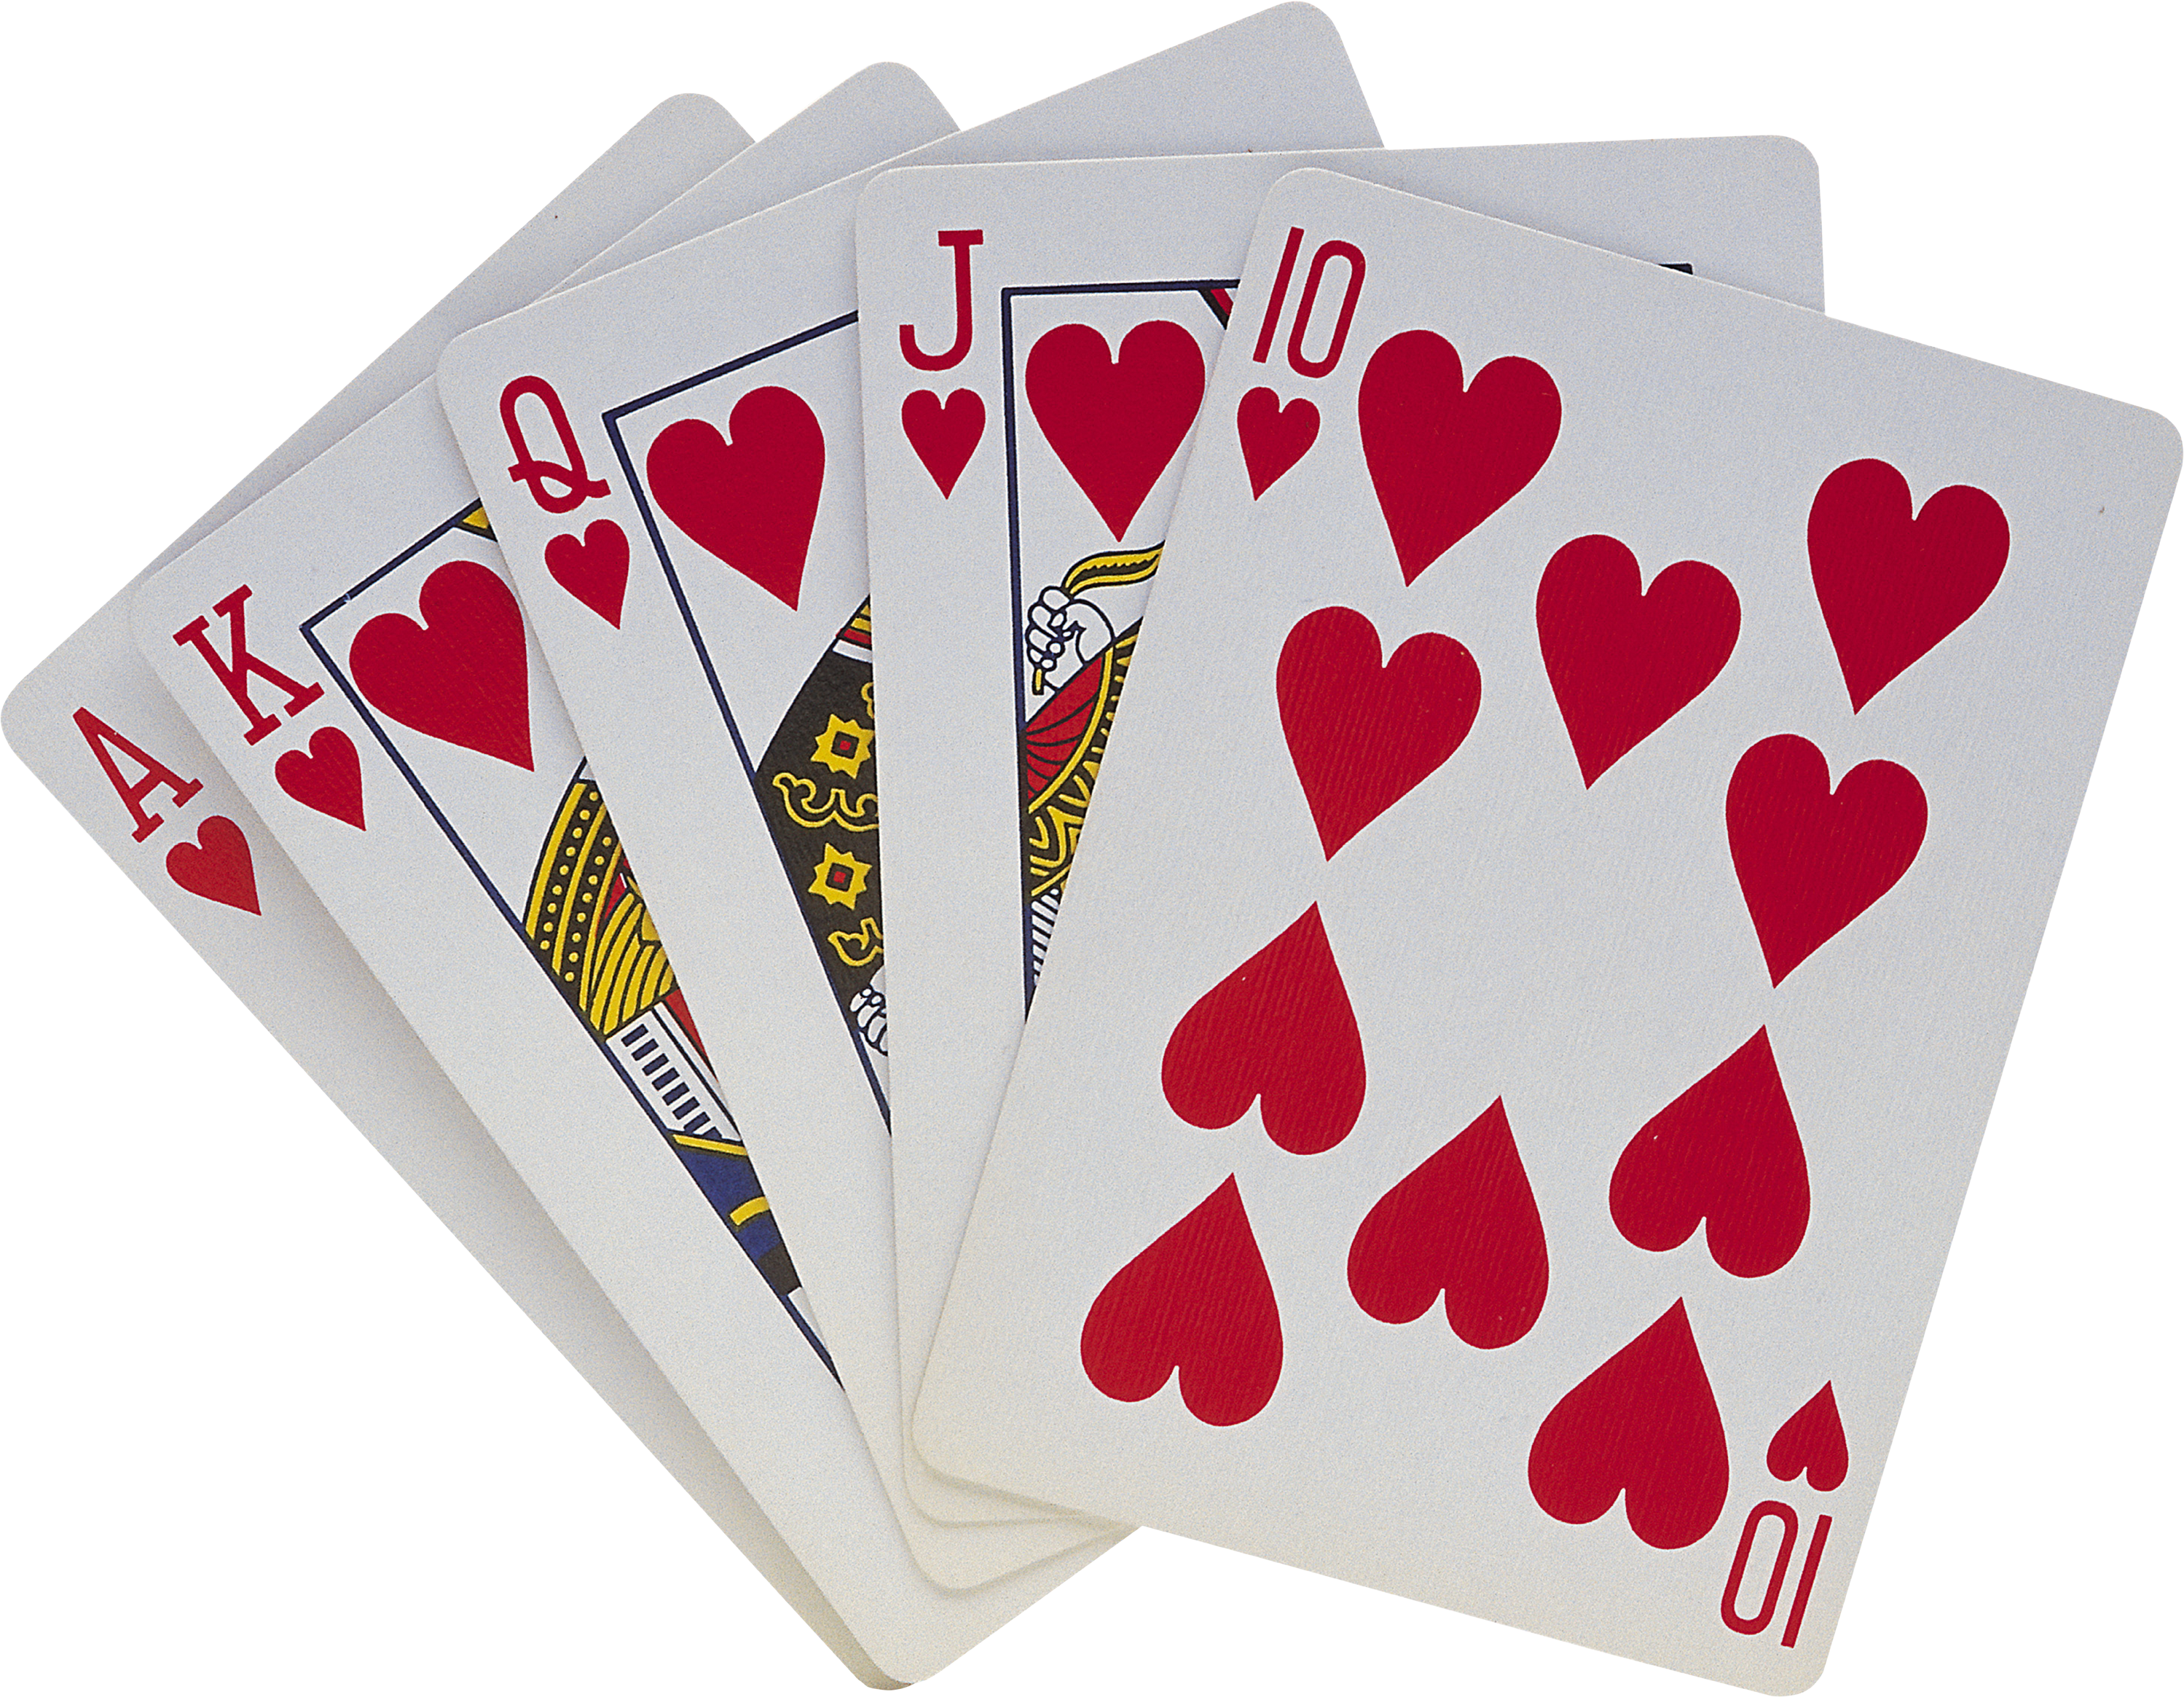 Ace Playing Card PNG